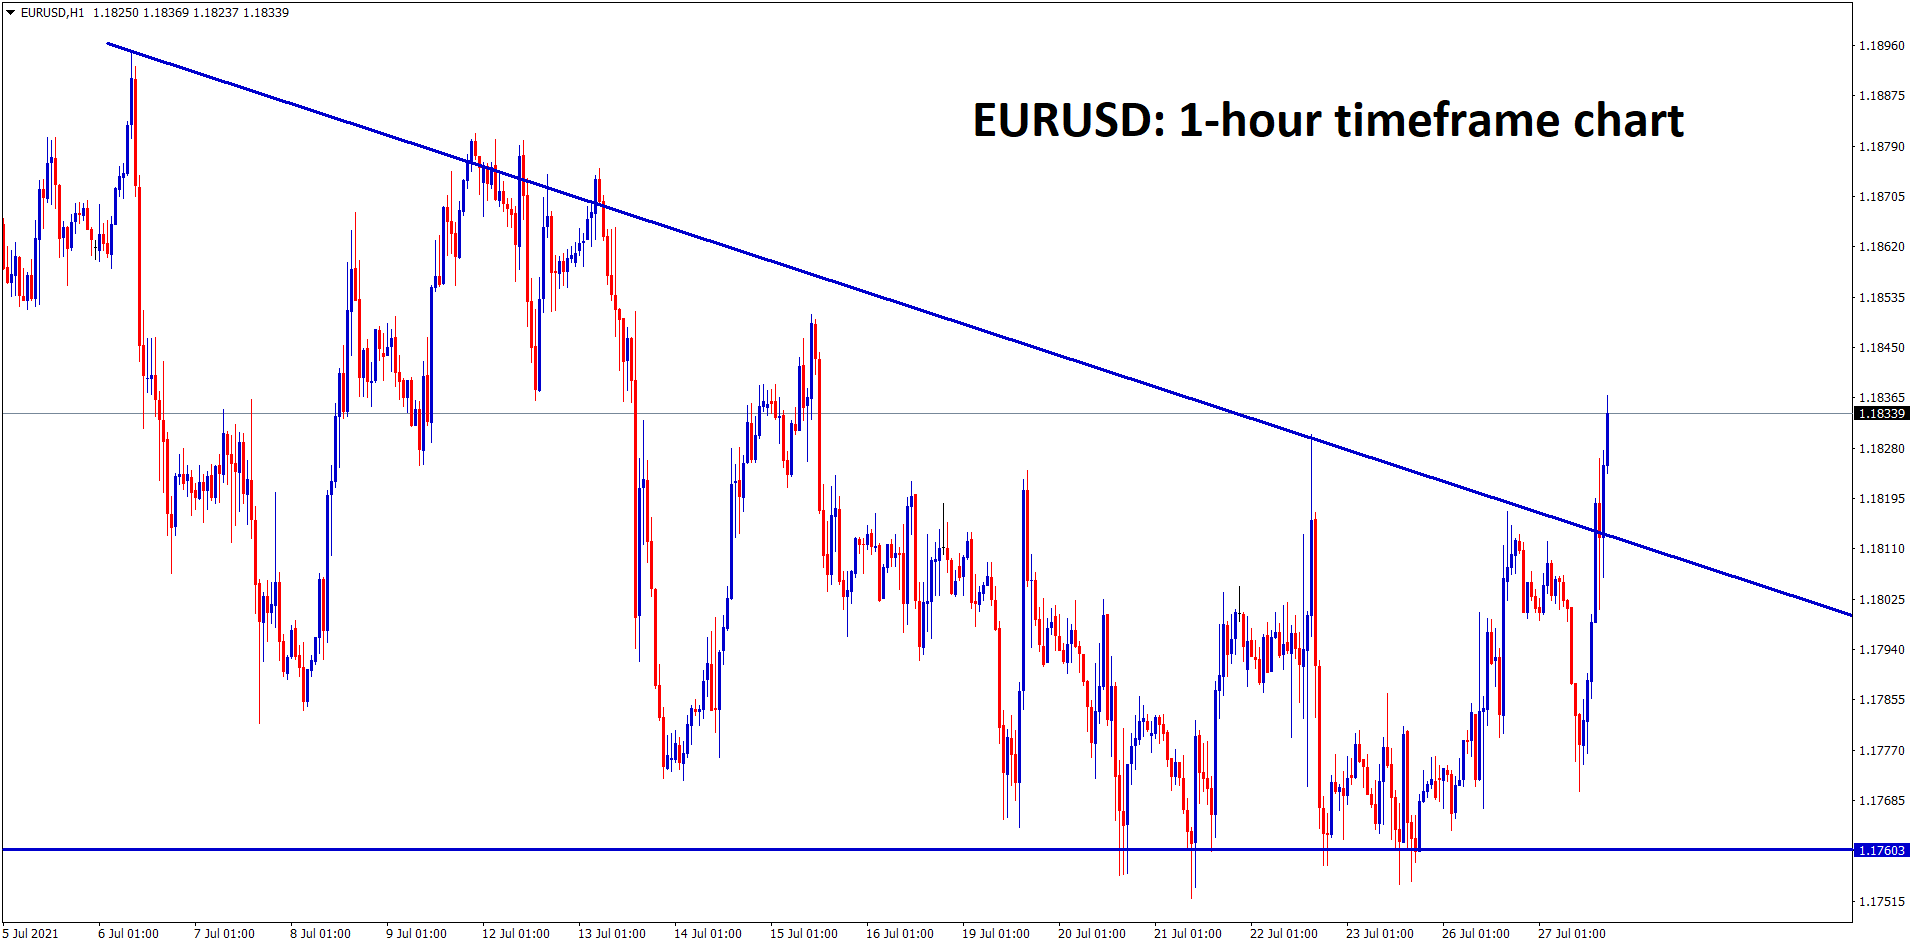 EURUSD is ranging and its trying to break the top of the falling wedge pattern